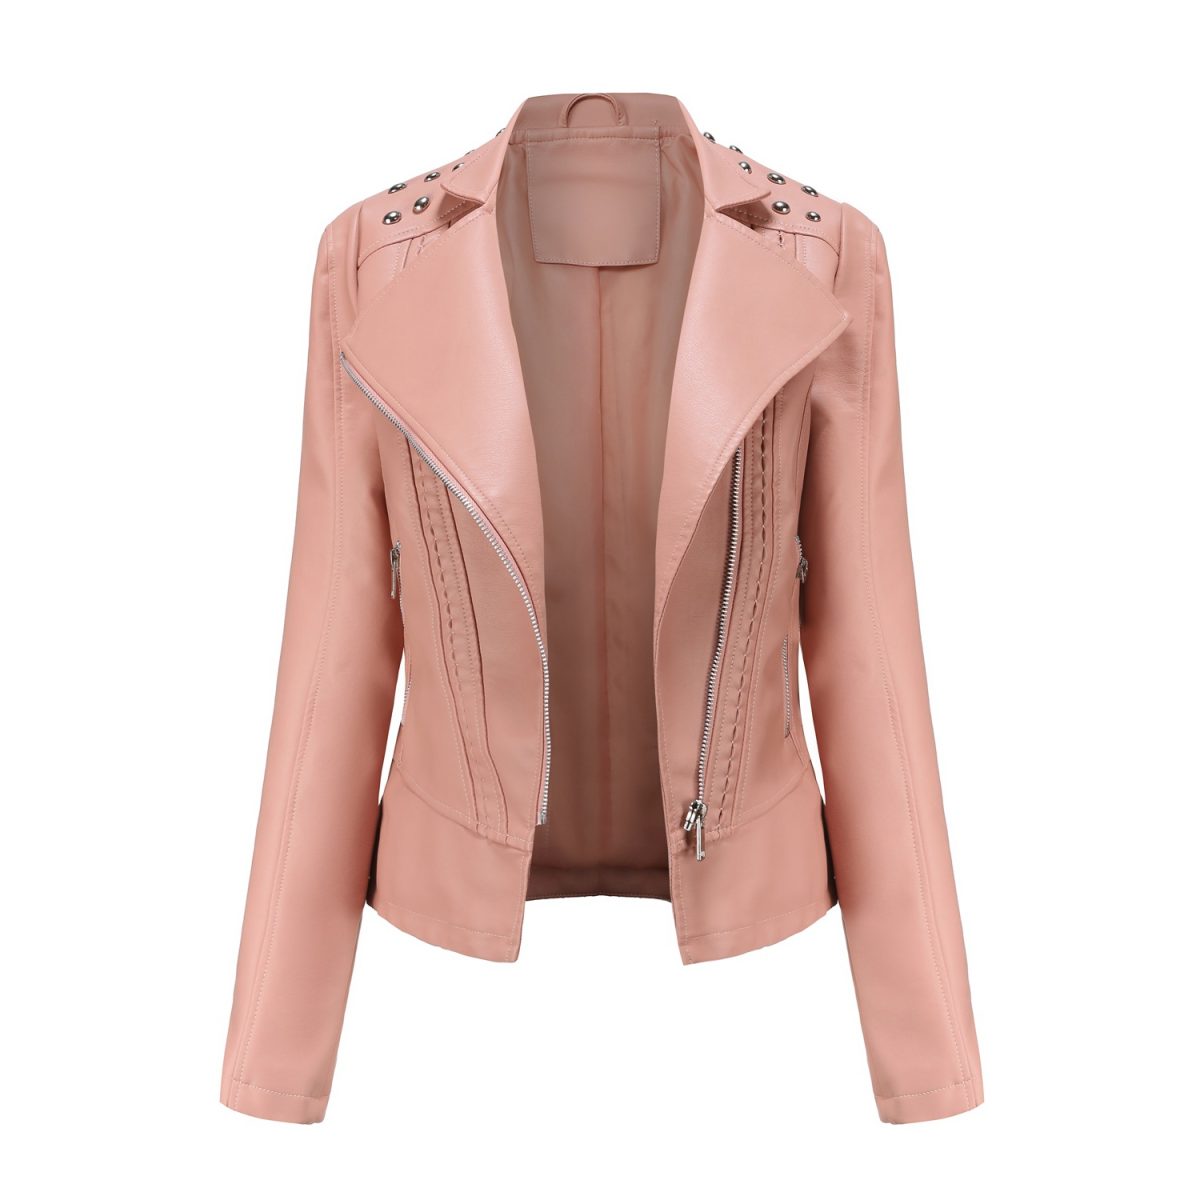 Leather Collared Motorcycle Jacket in Coats & Jackets